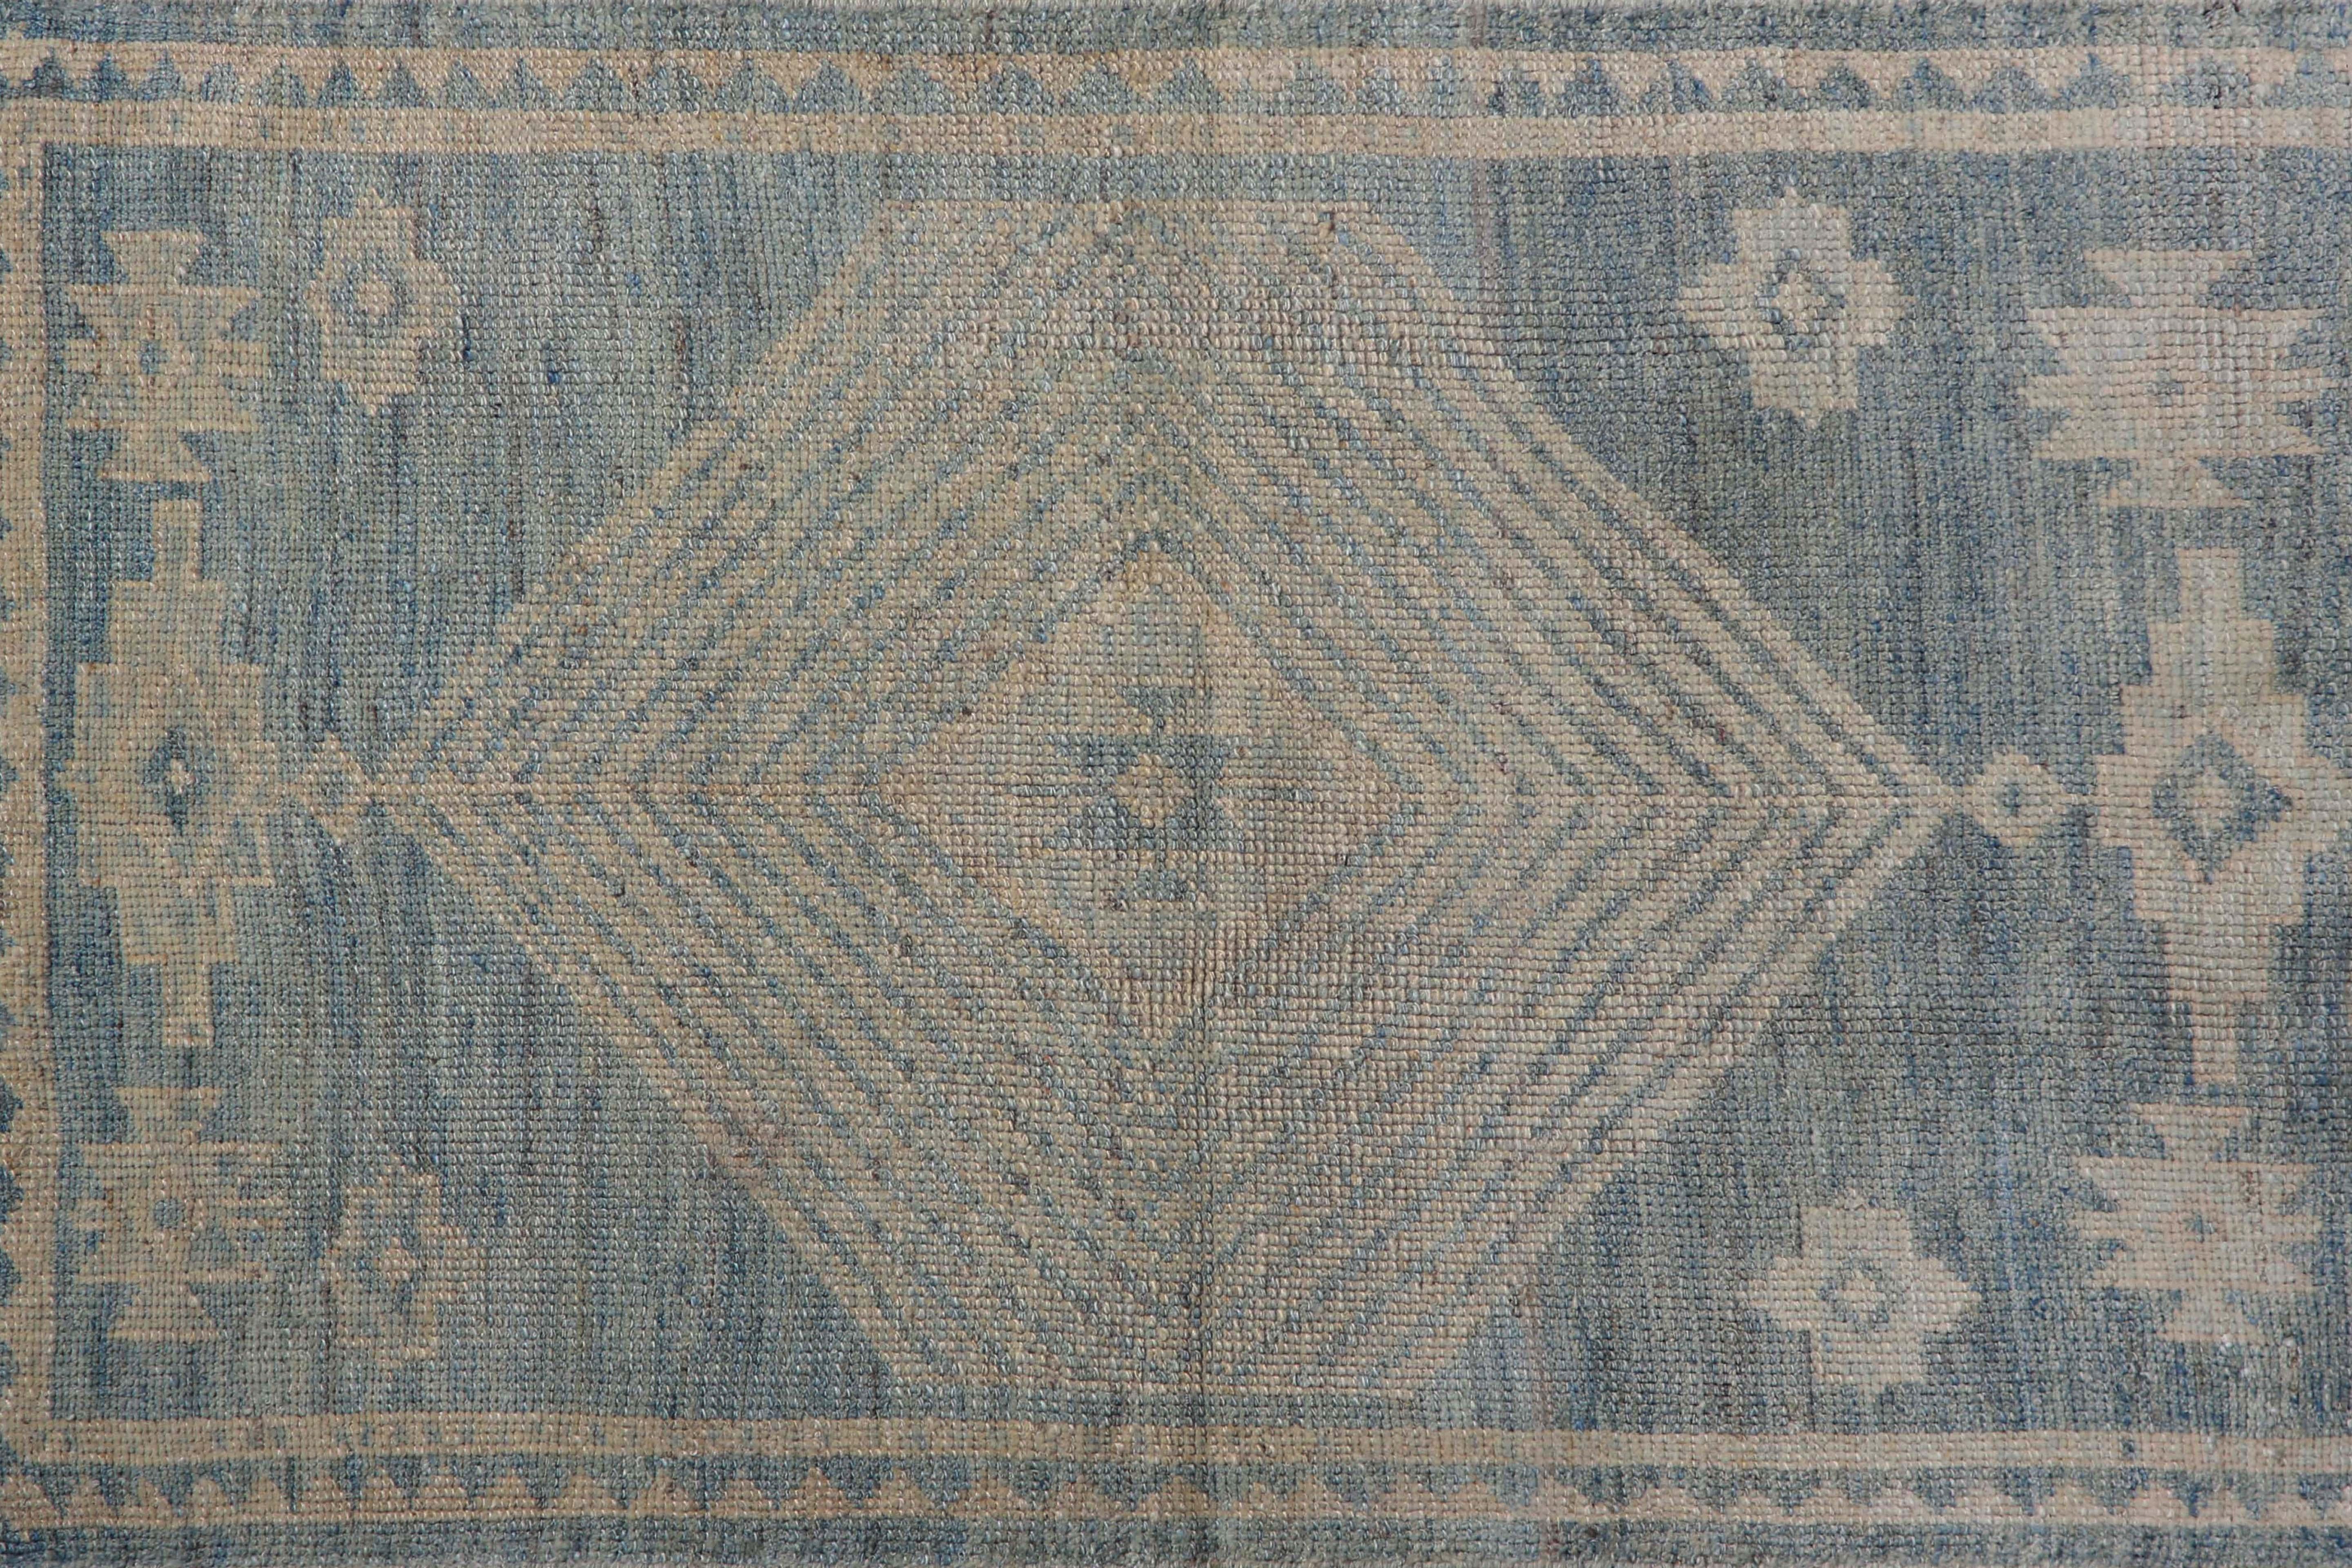 Introducing our exquisite handmade Turkish Oushak runner rug, measuring 3'0'' by 4'9''. This stunning rug features a beautiful blue background with light cream colors seamlessly woven into its traditional design. The small visible border blends